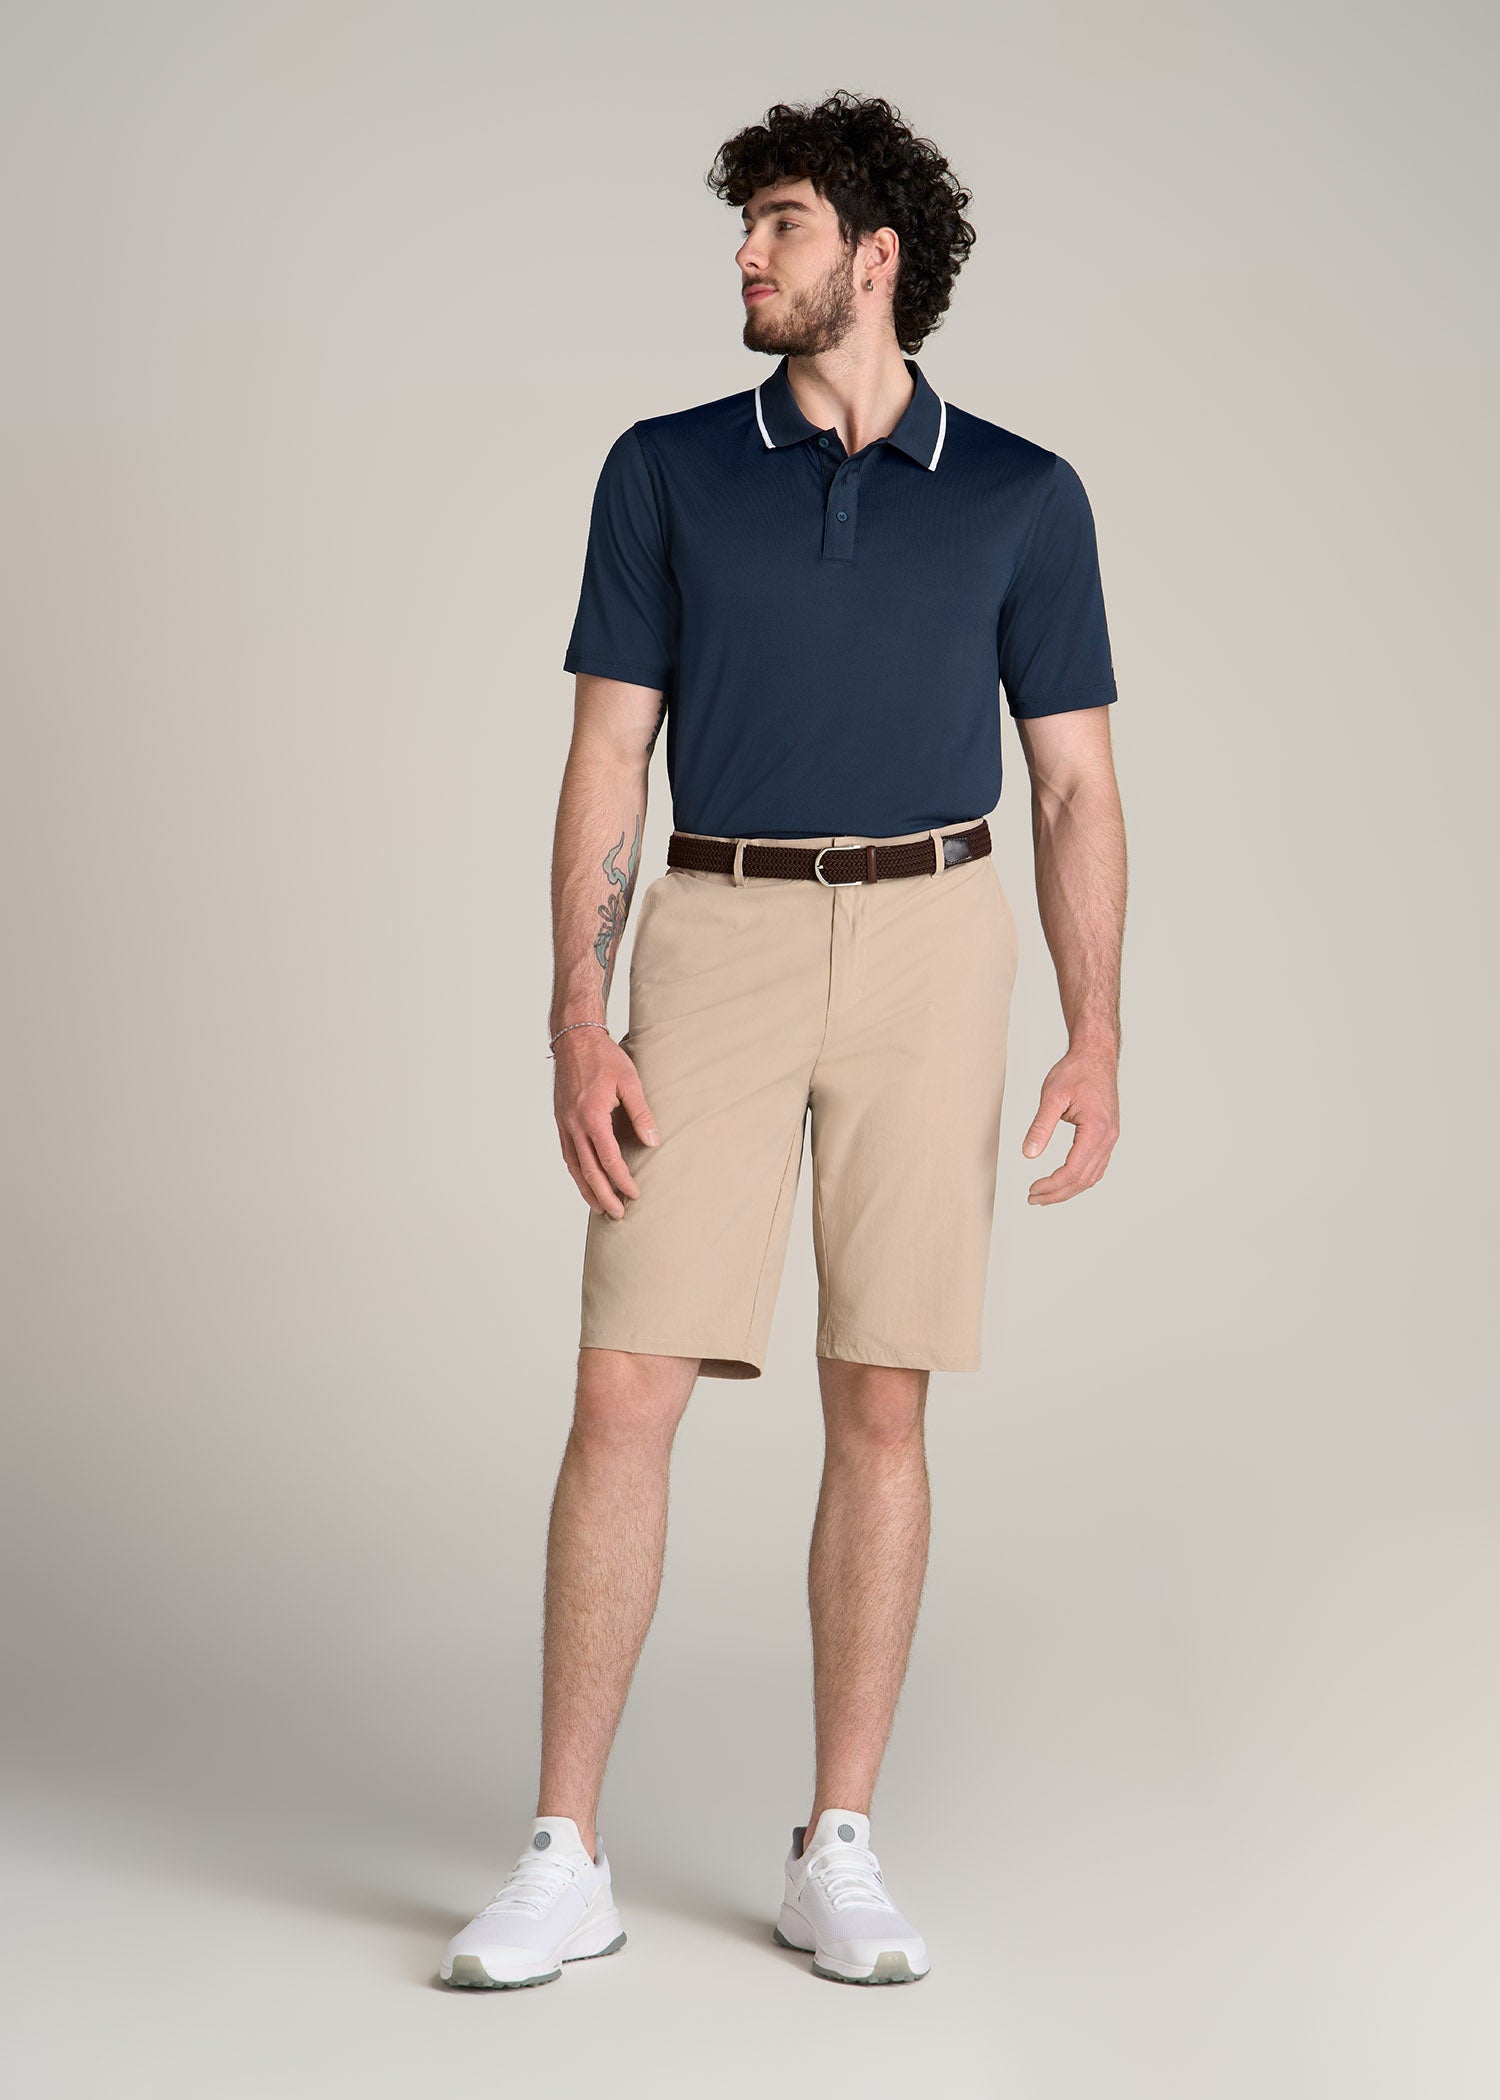 American-Tall-Men-AT-Performance-Tipped-Golf-Polo-Bright-Navy-full